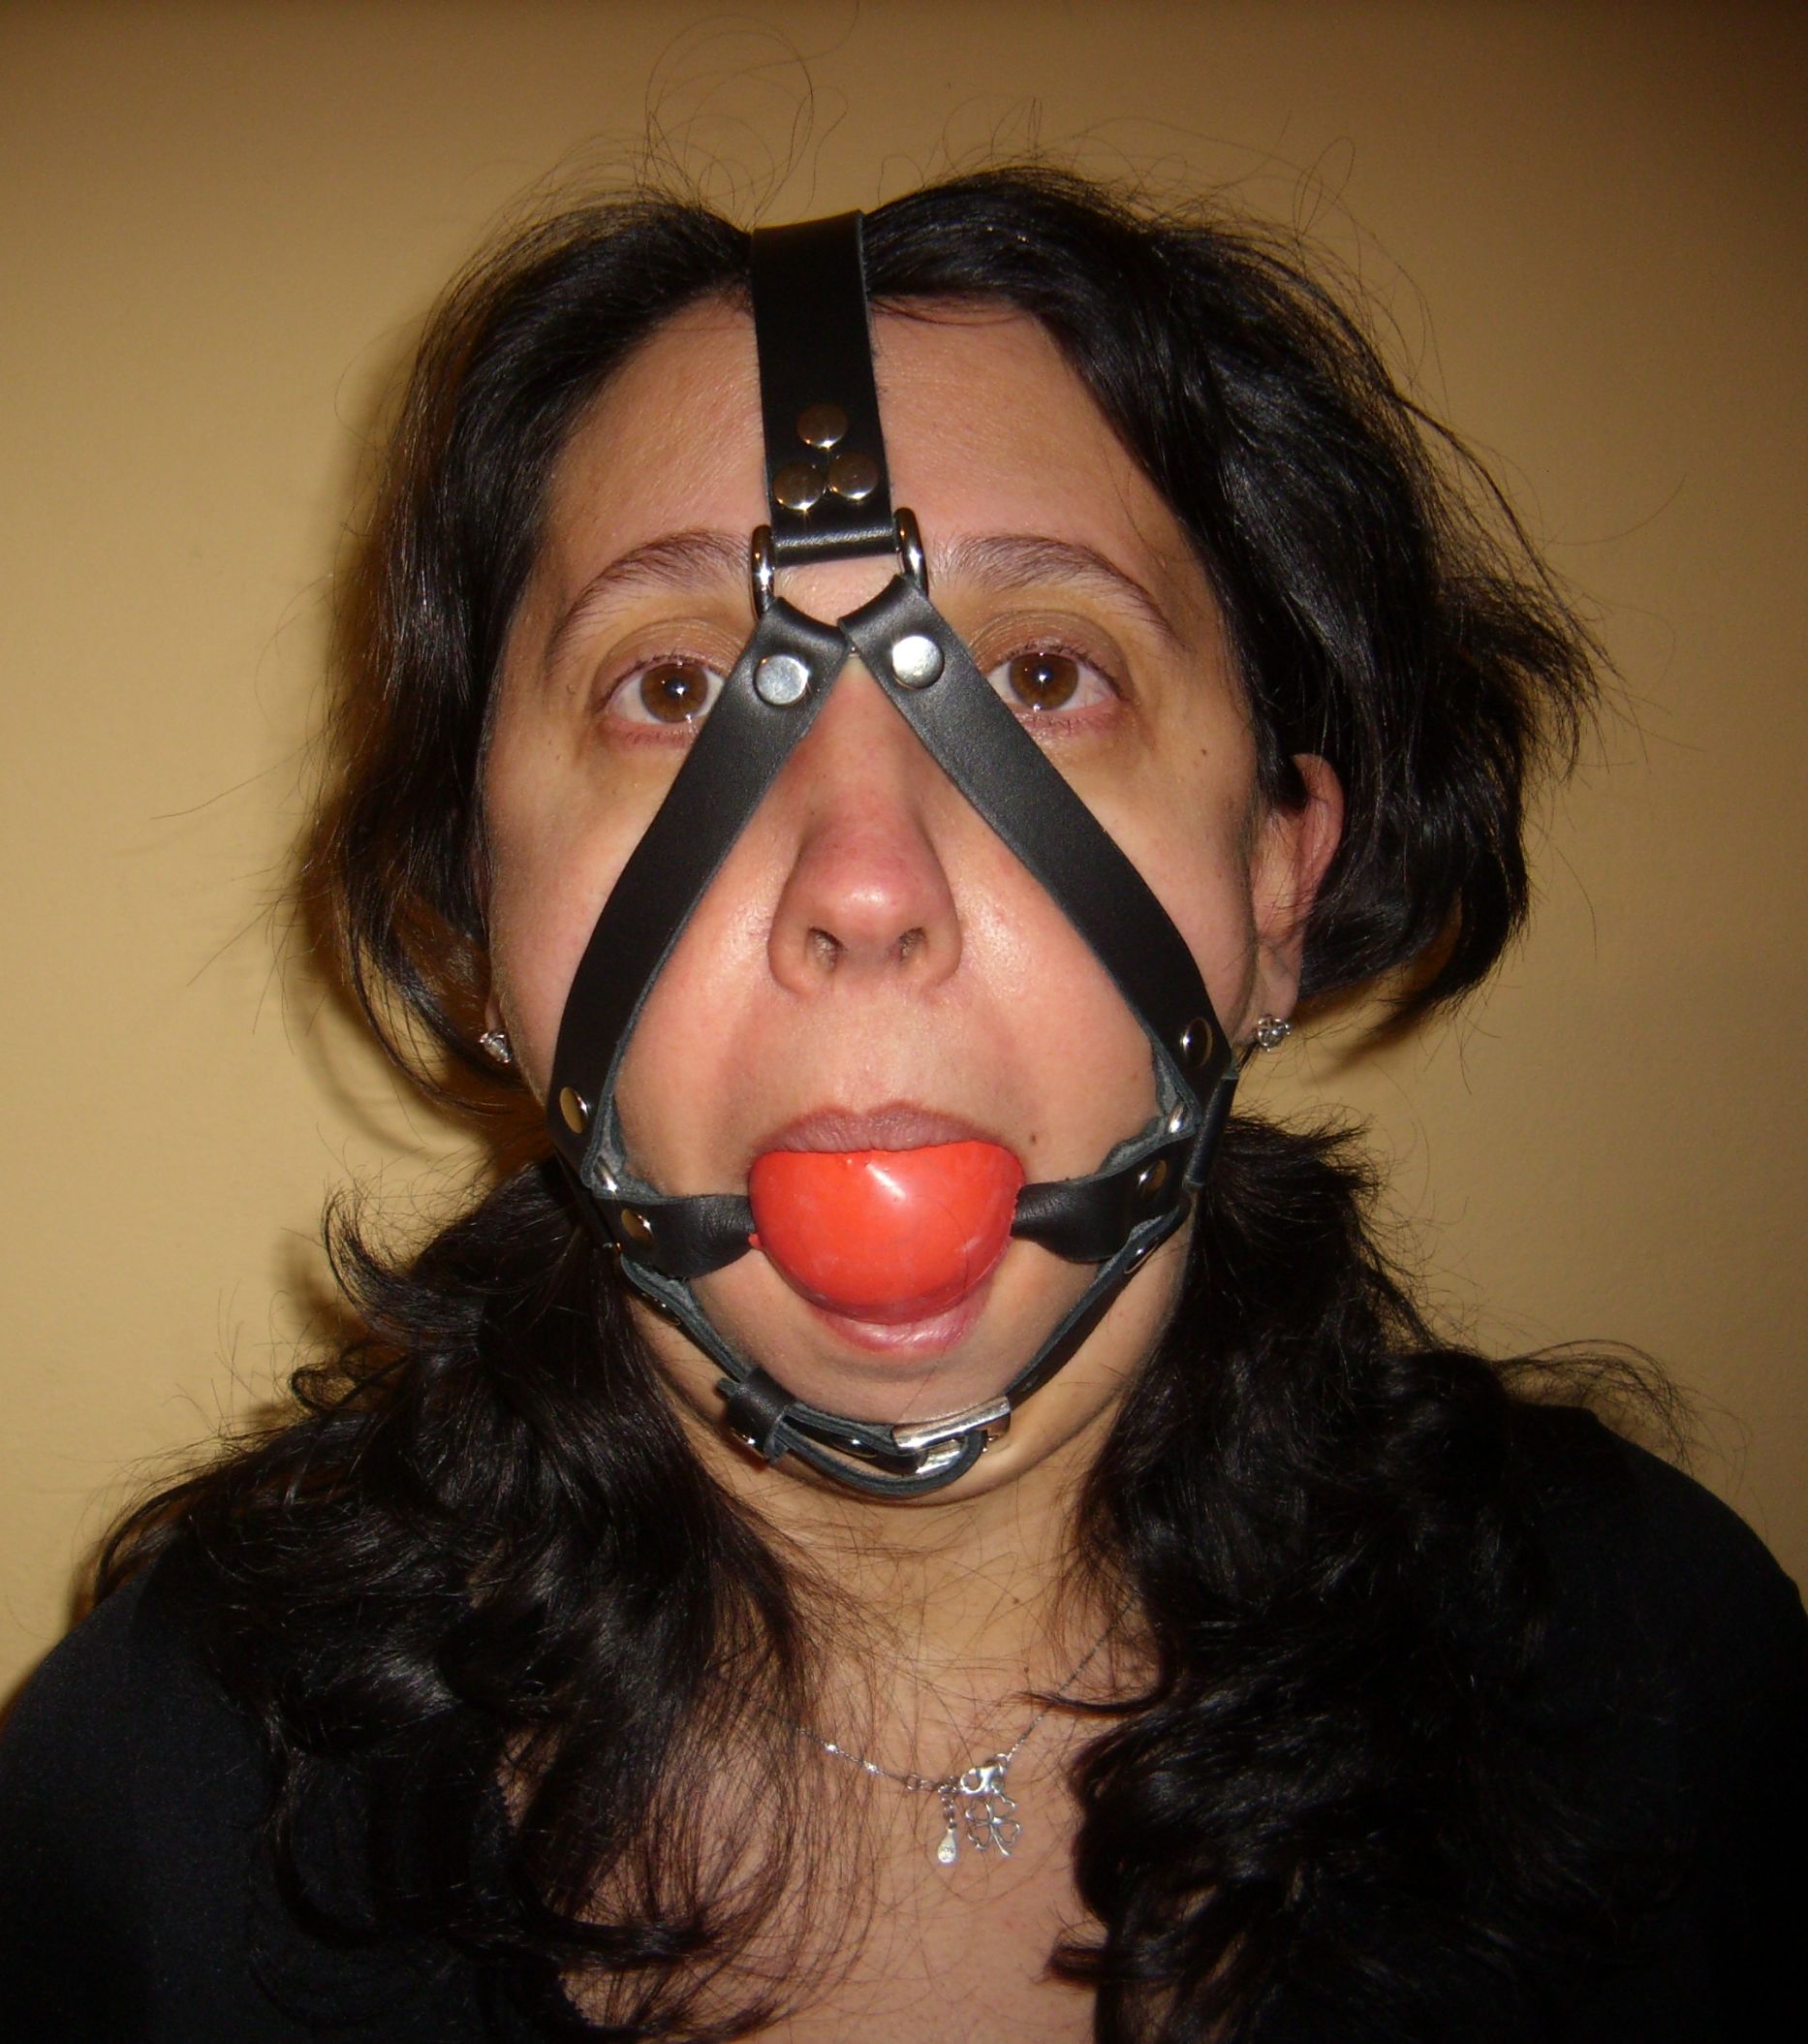 cammy loh recommends Ball Gag Harness